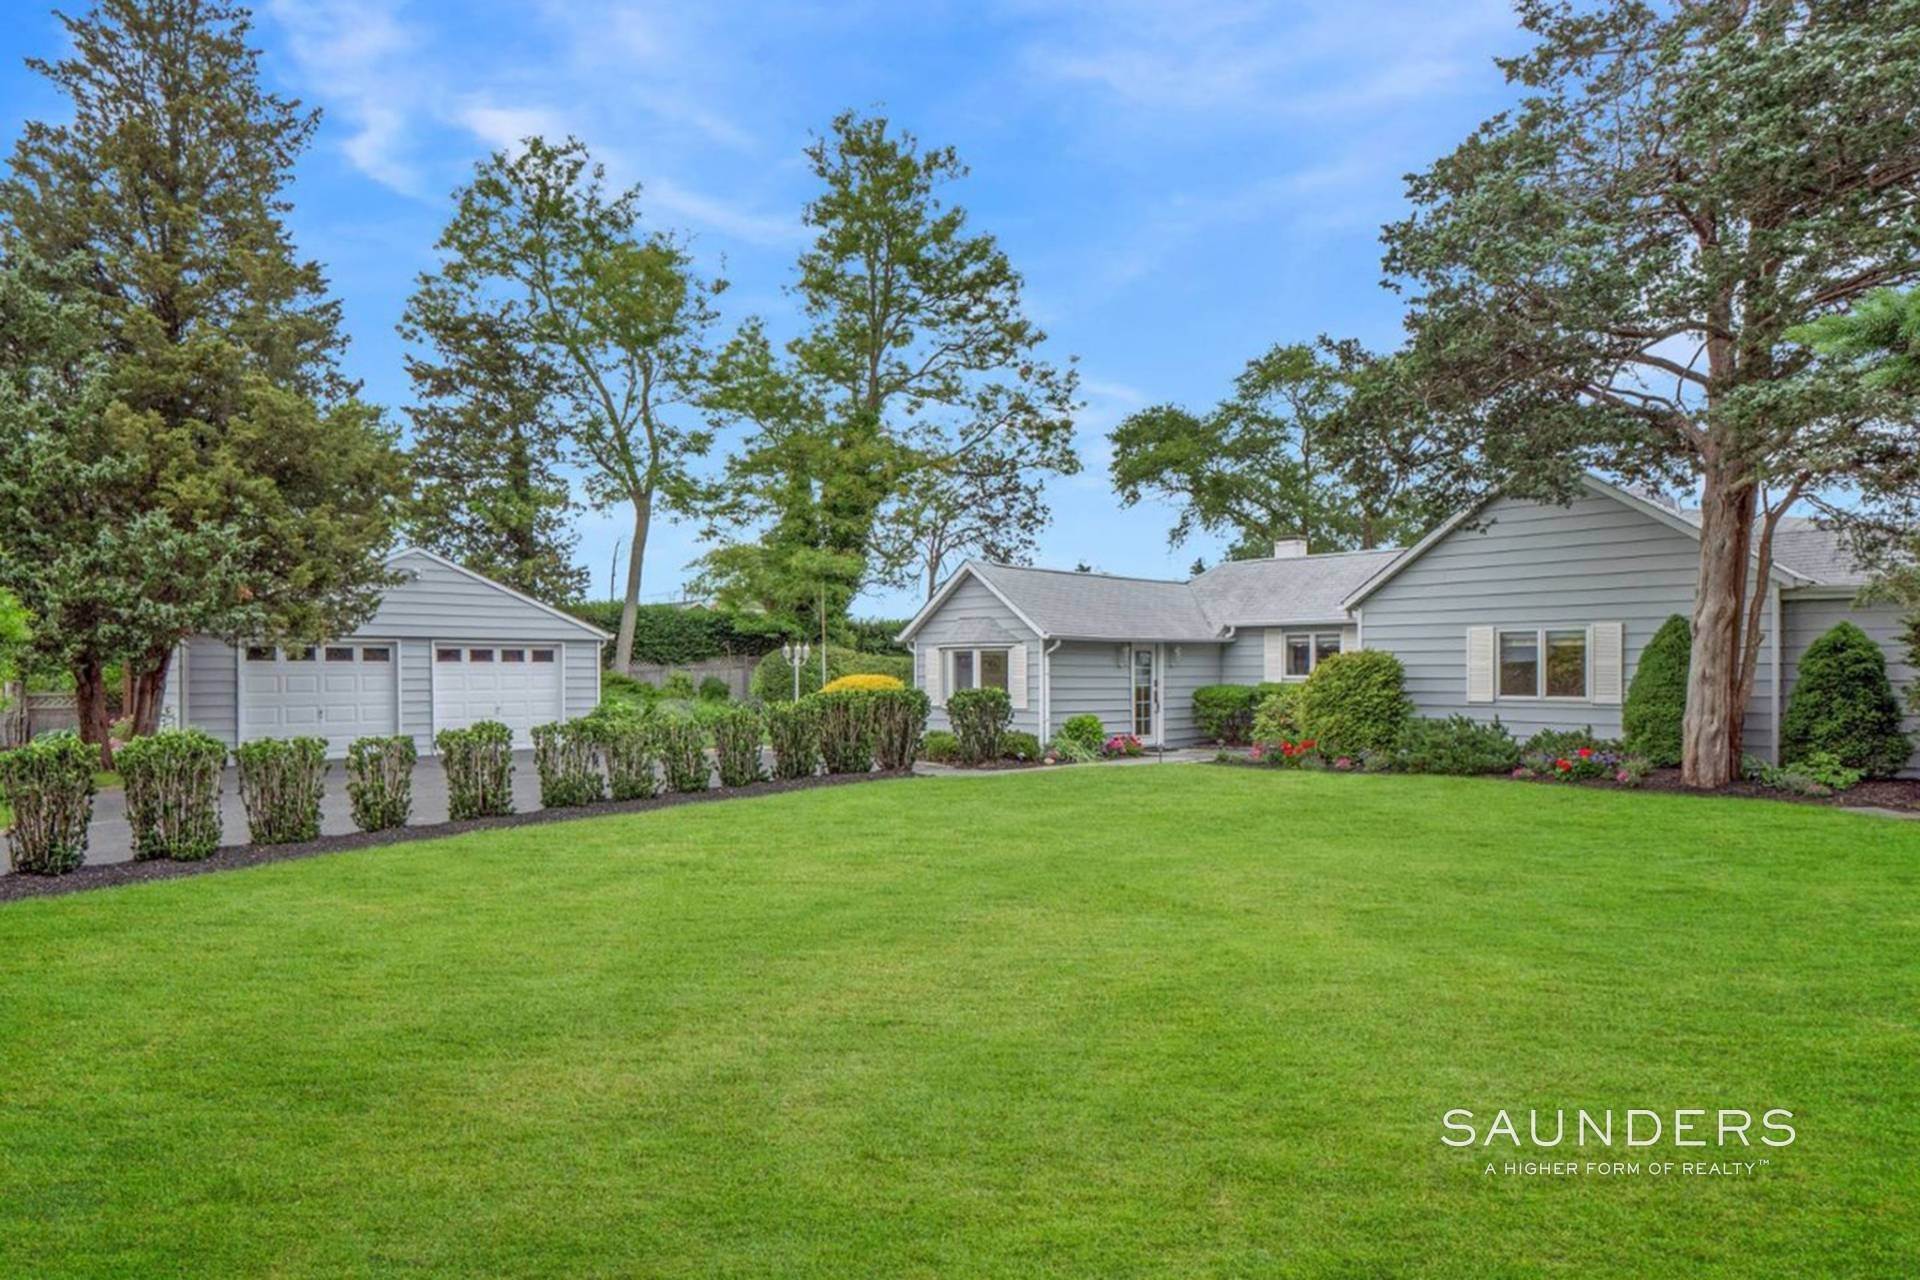 Single Family Homes at Waterfront With Pool And Dock Southampton, NY 11968